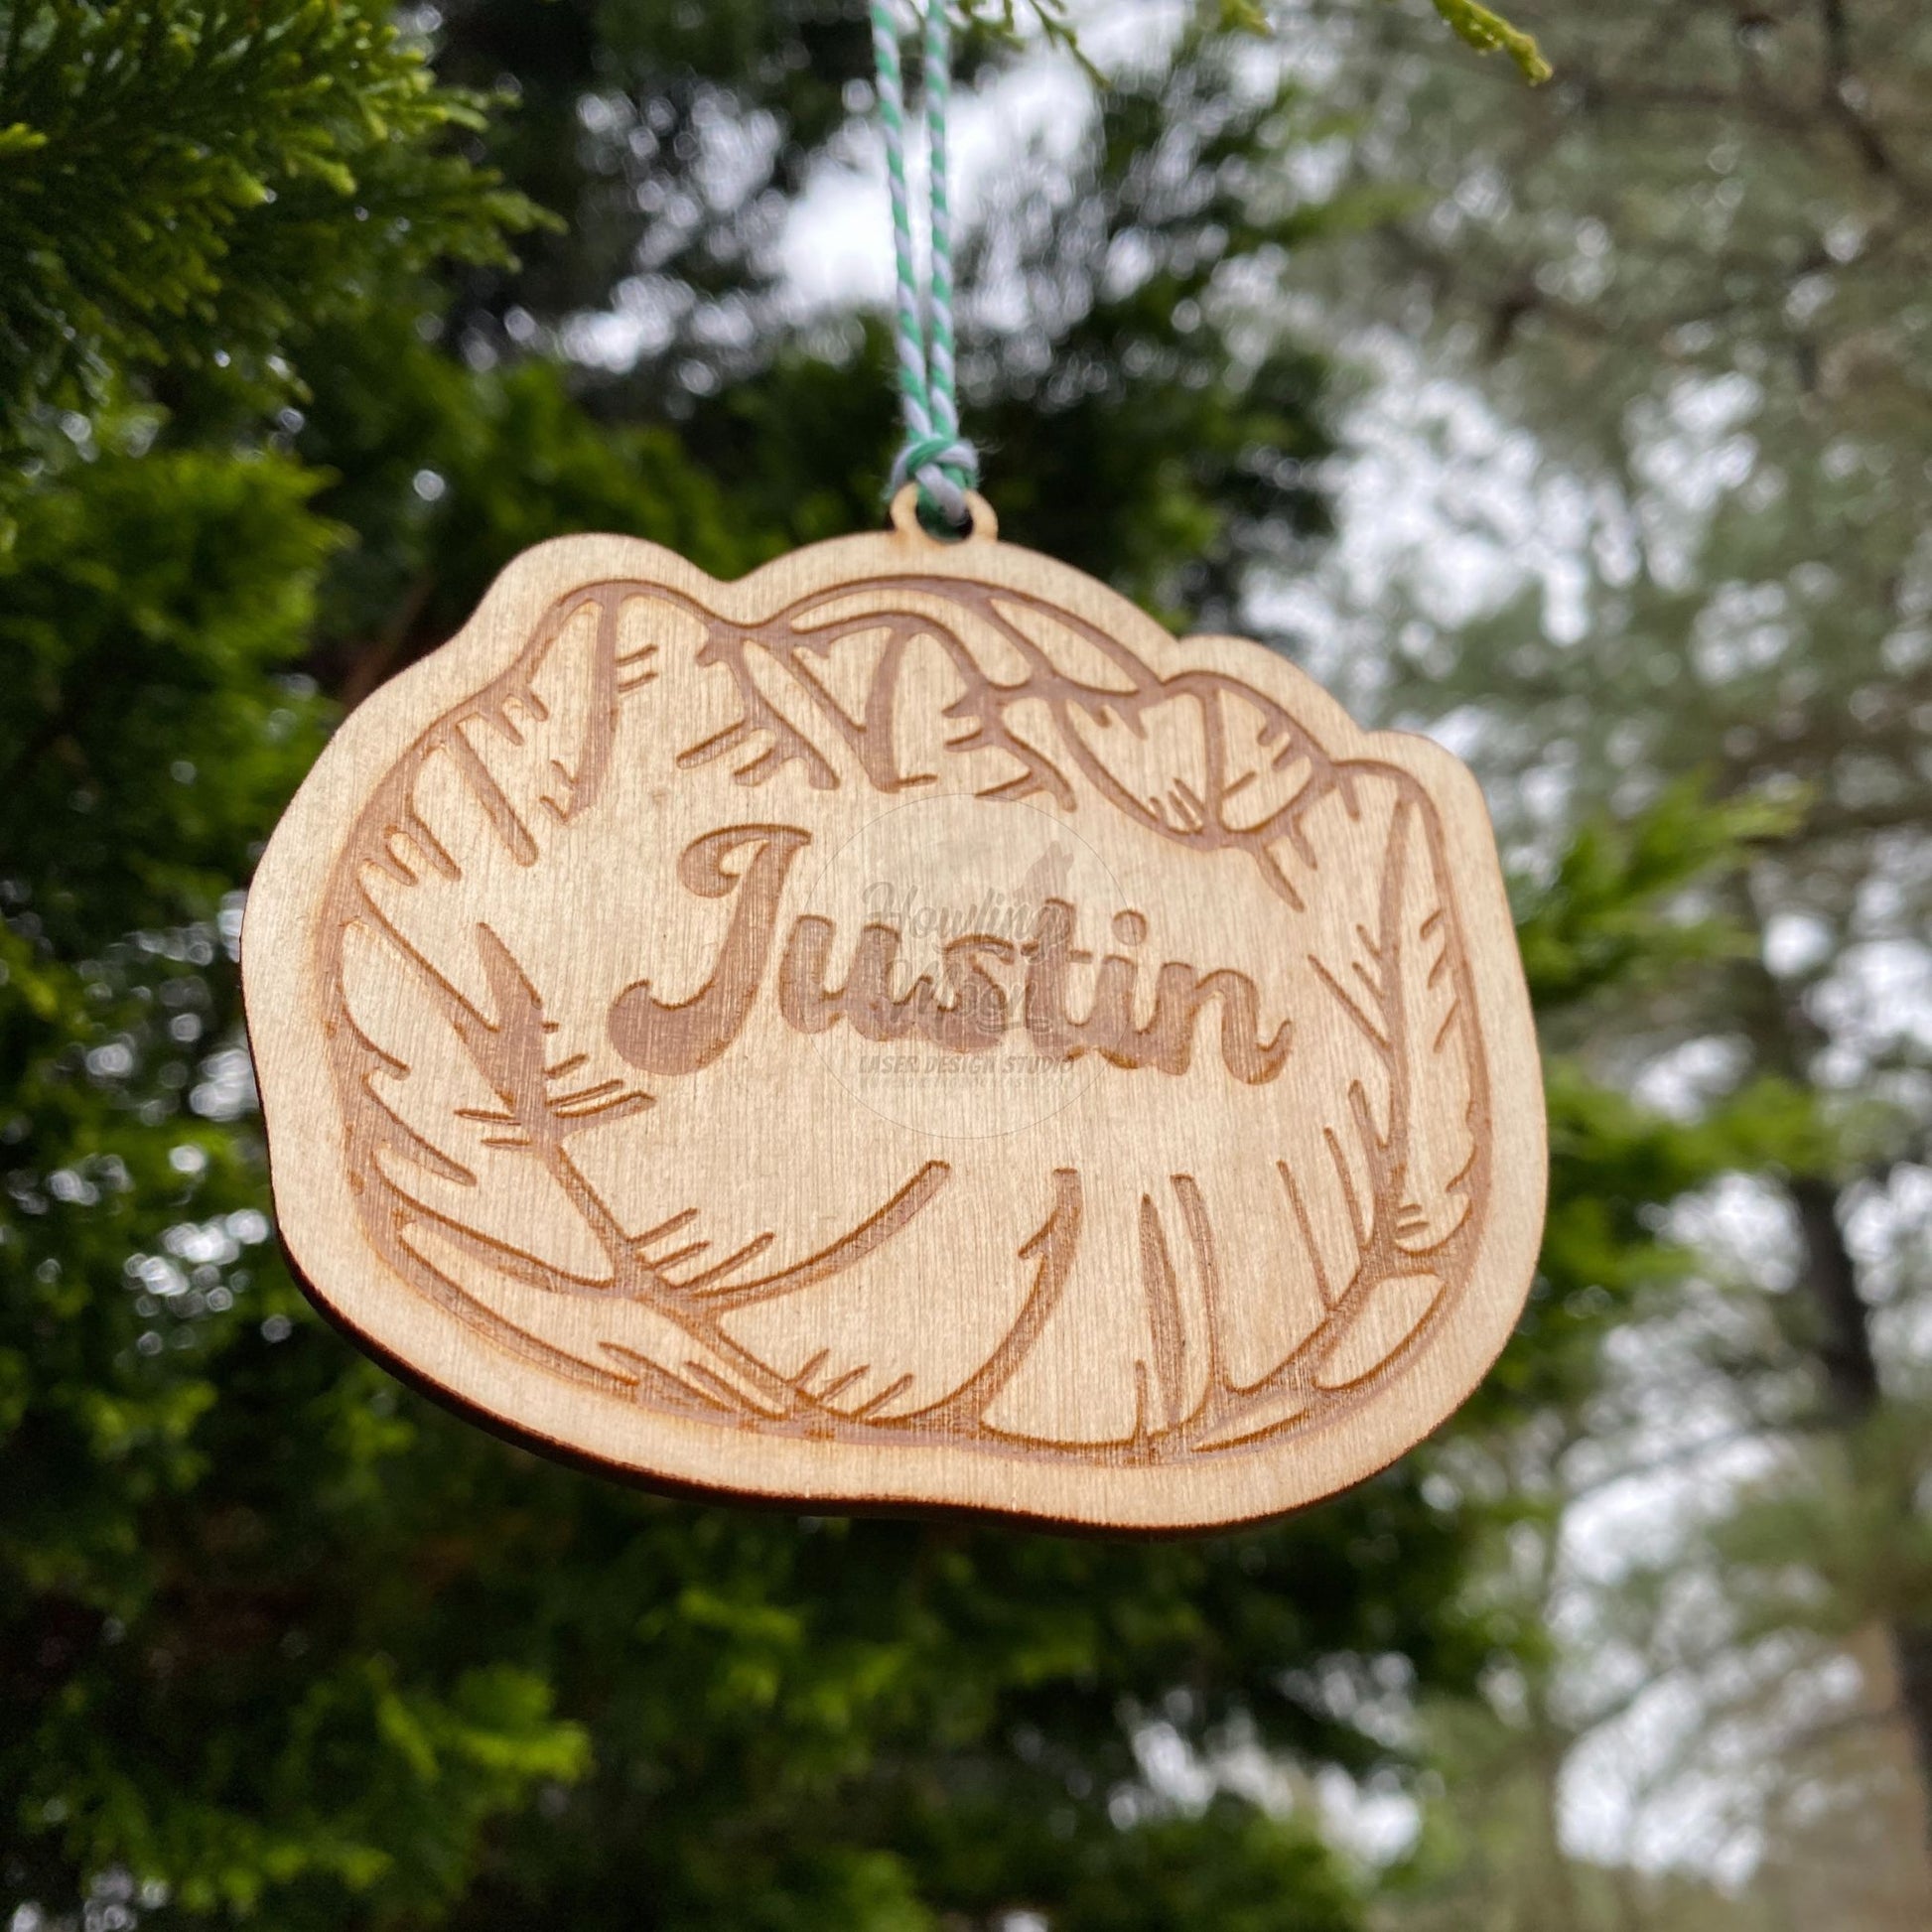 Close up of Personalized cabbage ornament hanging from a tree with green & white twine. Made by Howling Moon Laser Design in Virginia, USA